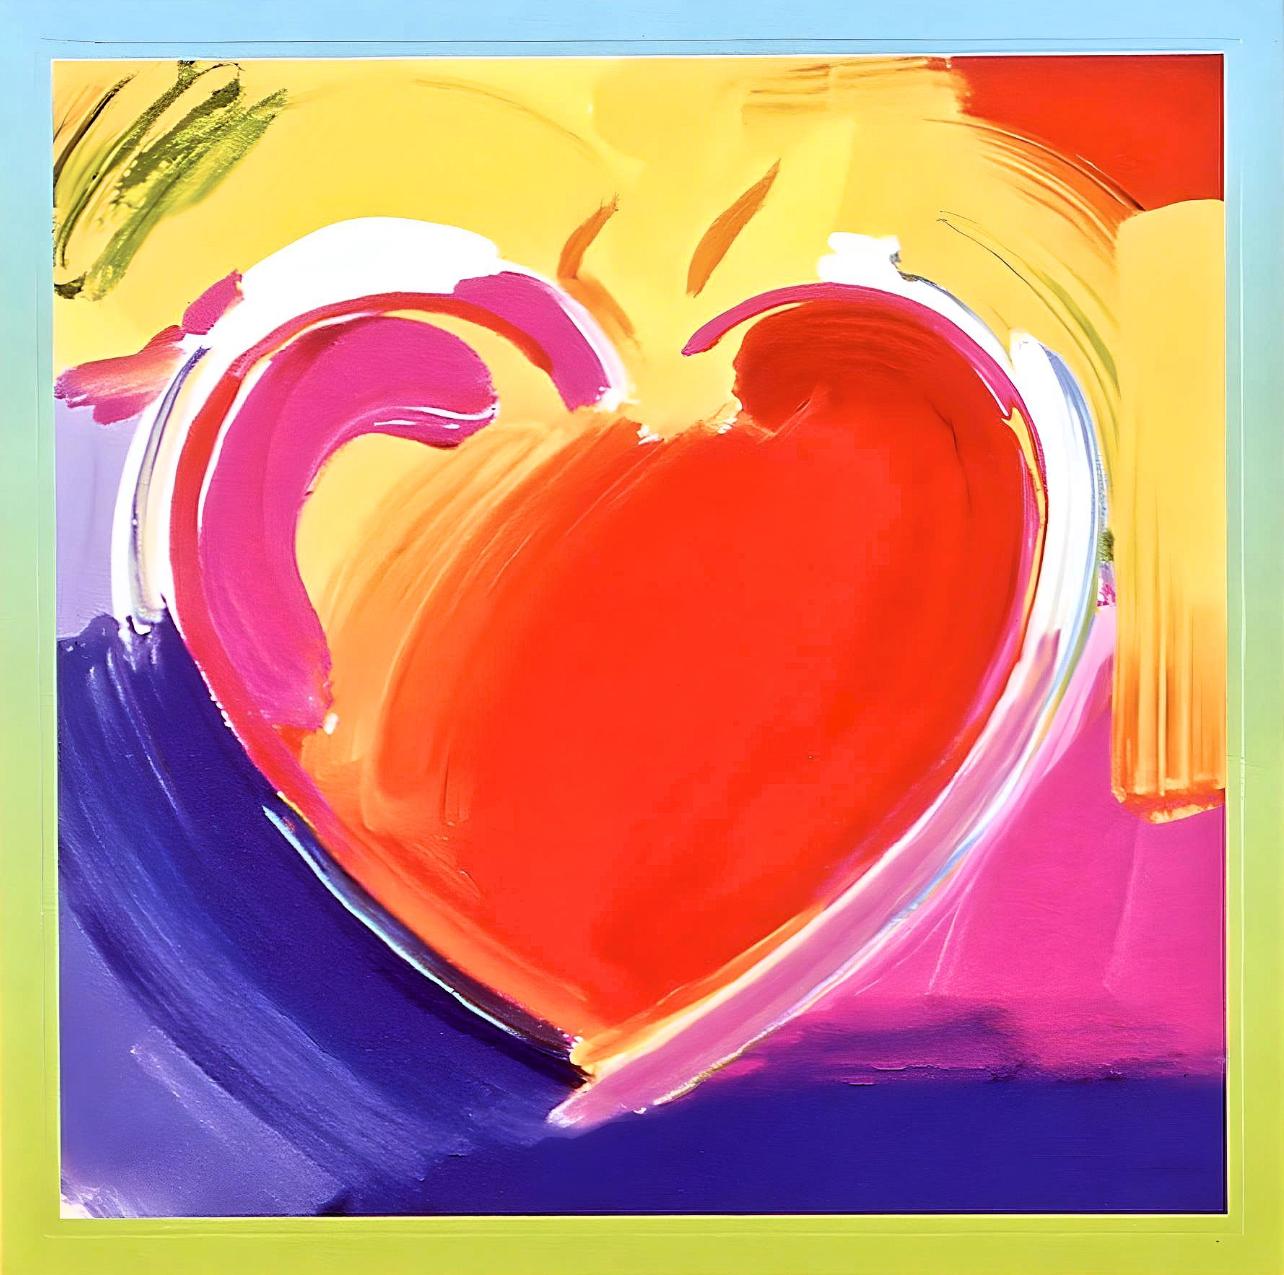 Heart on Blends, Peter Max 1